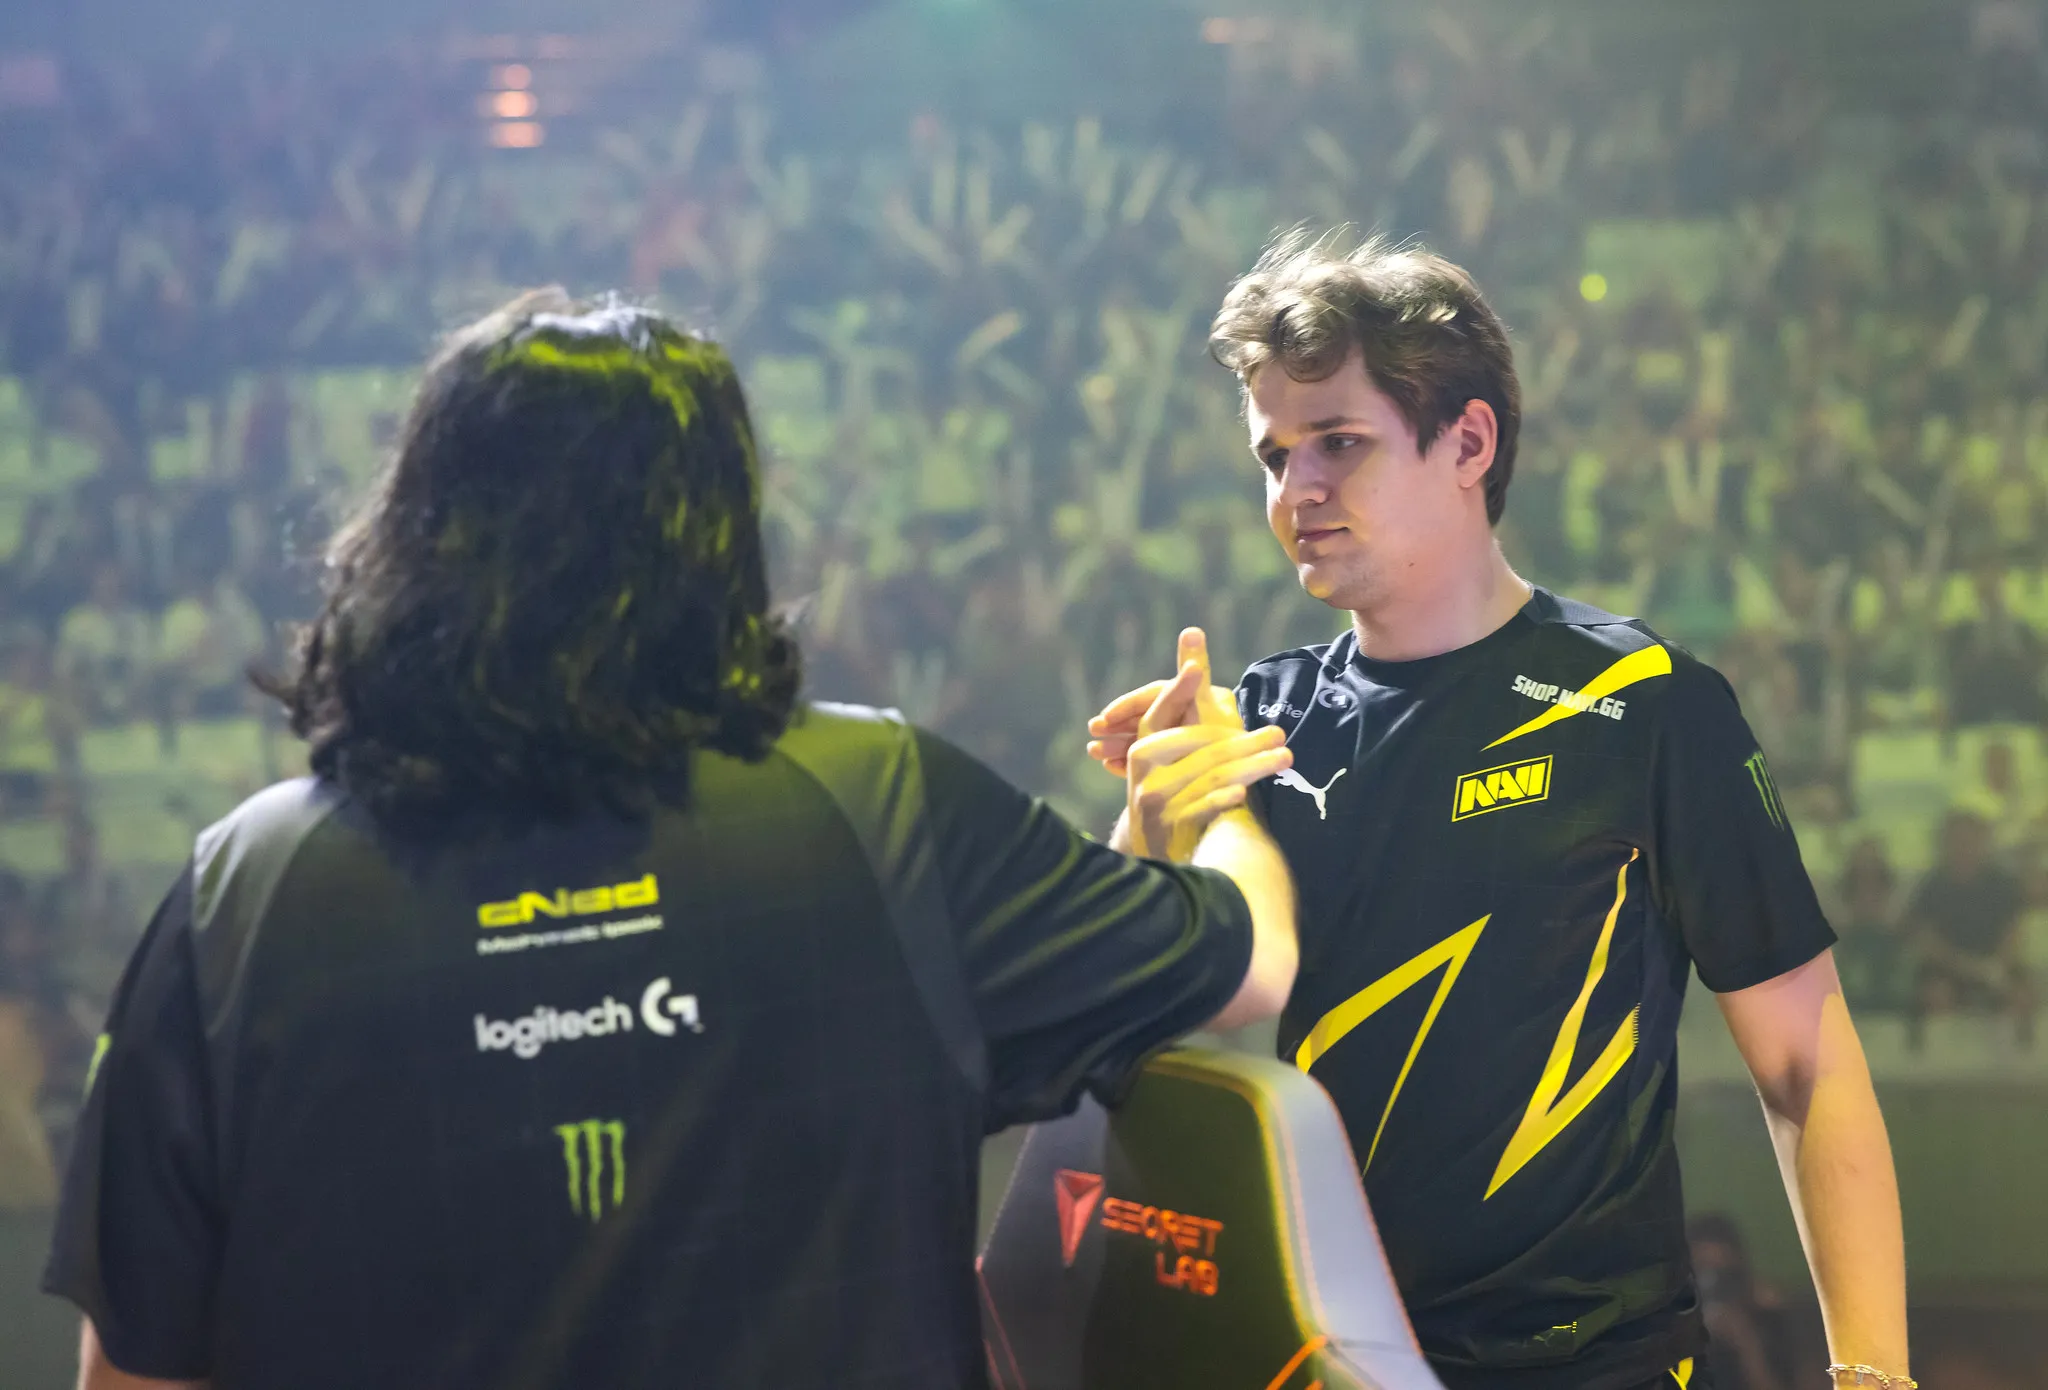 Shao shaking hands with another payer in a packed arena